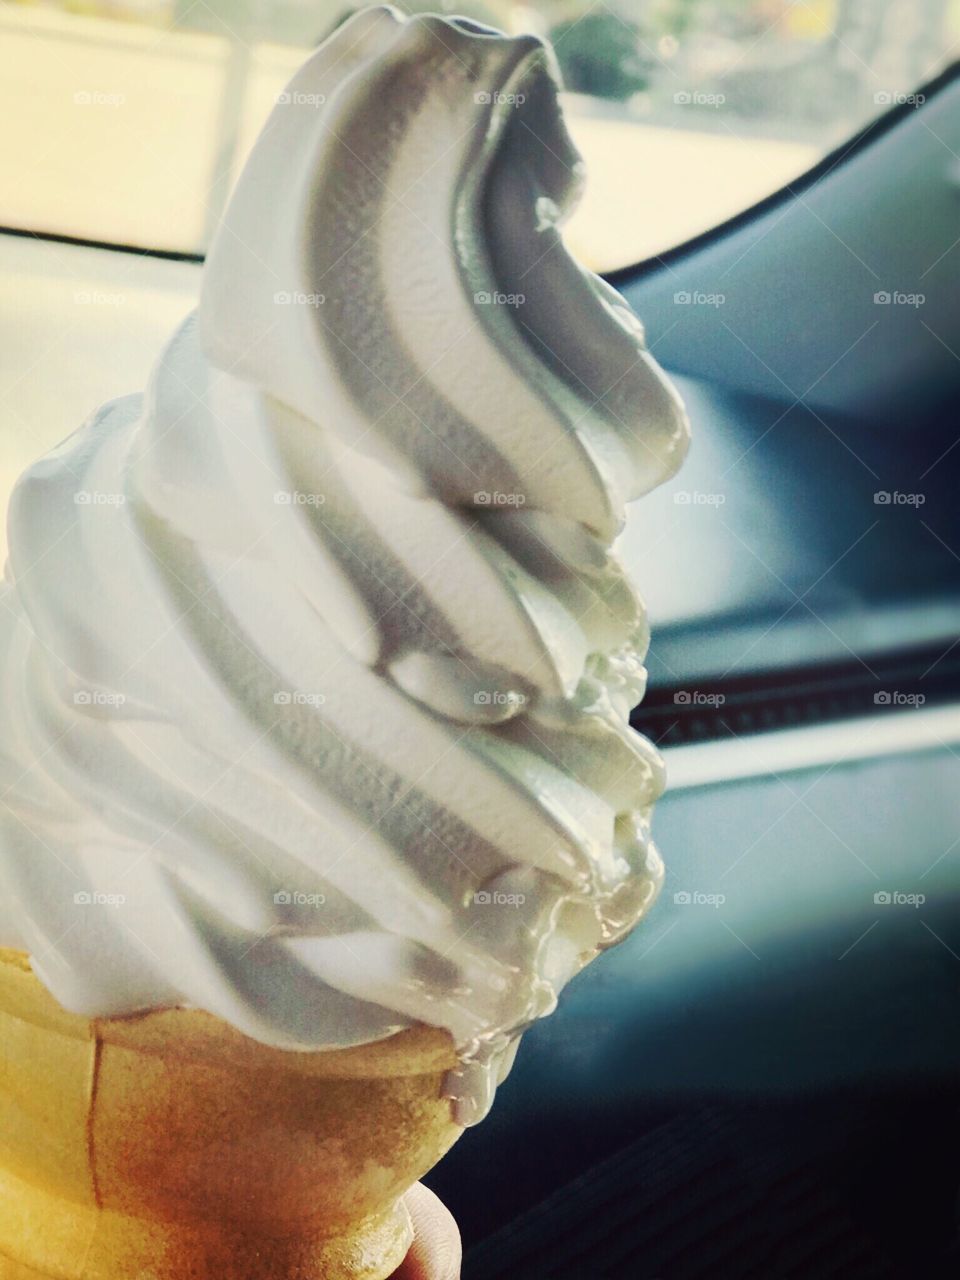 Delicious creamy vanilla ice cream cone melting in the sunlight on a hot summers day 